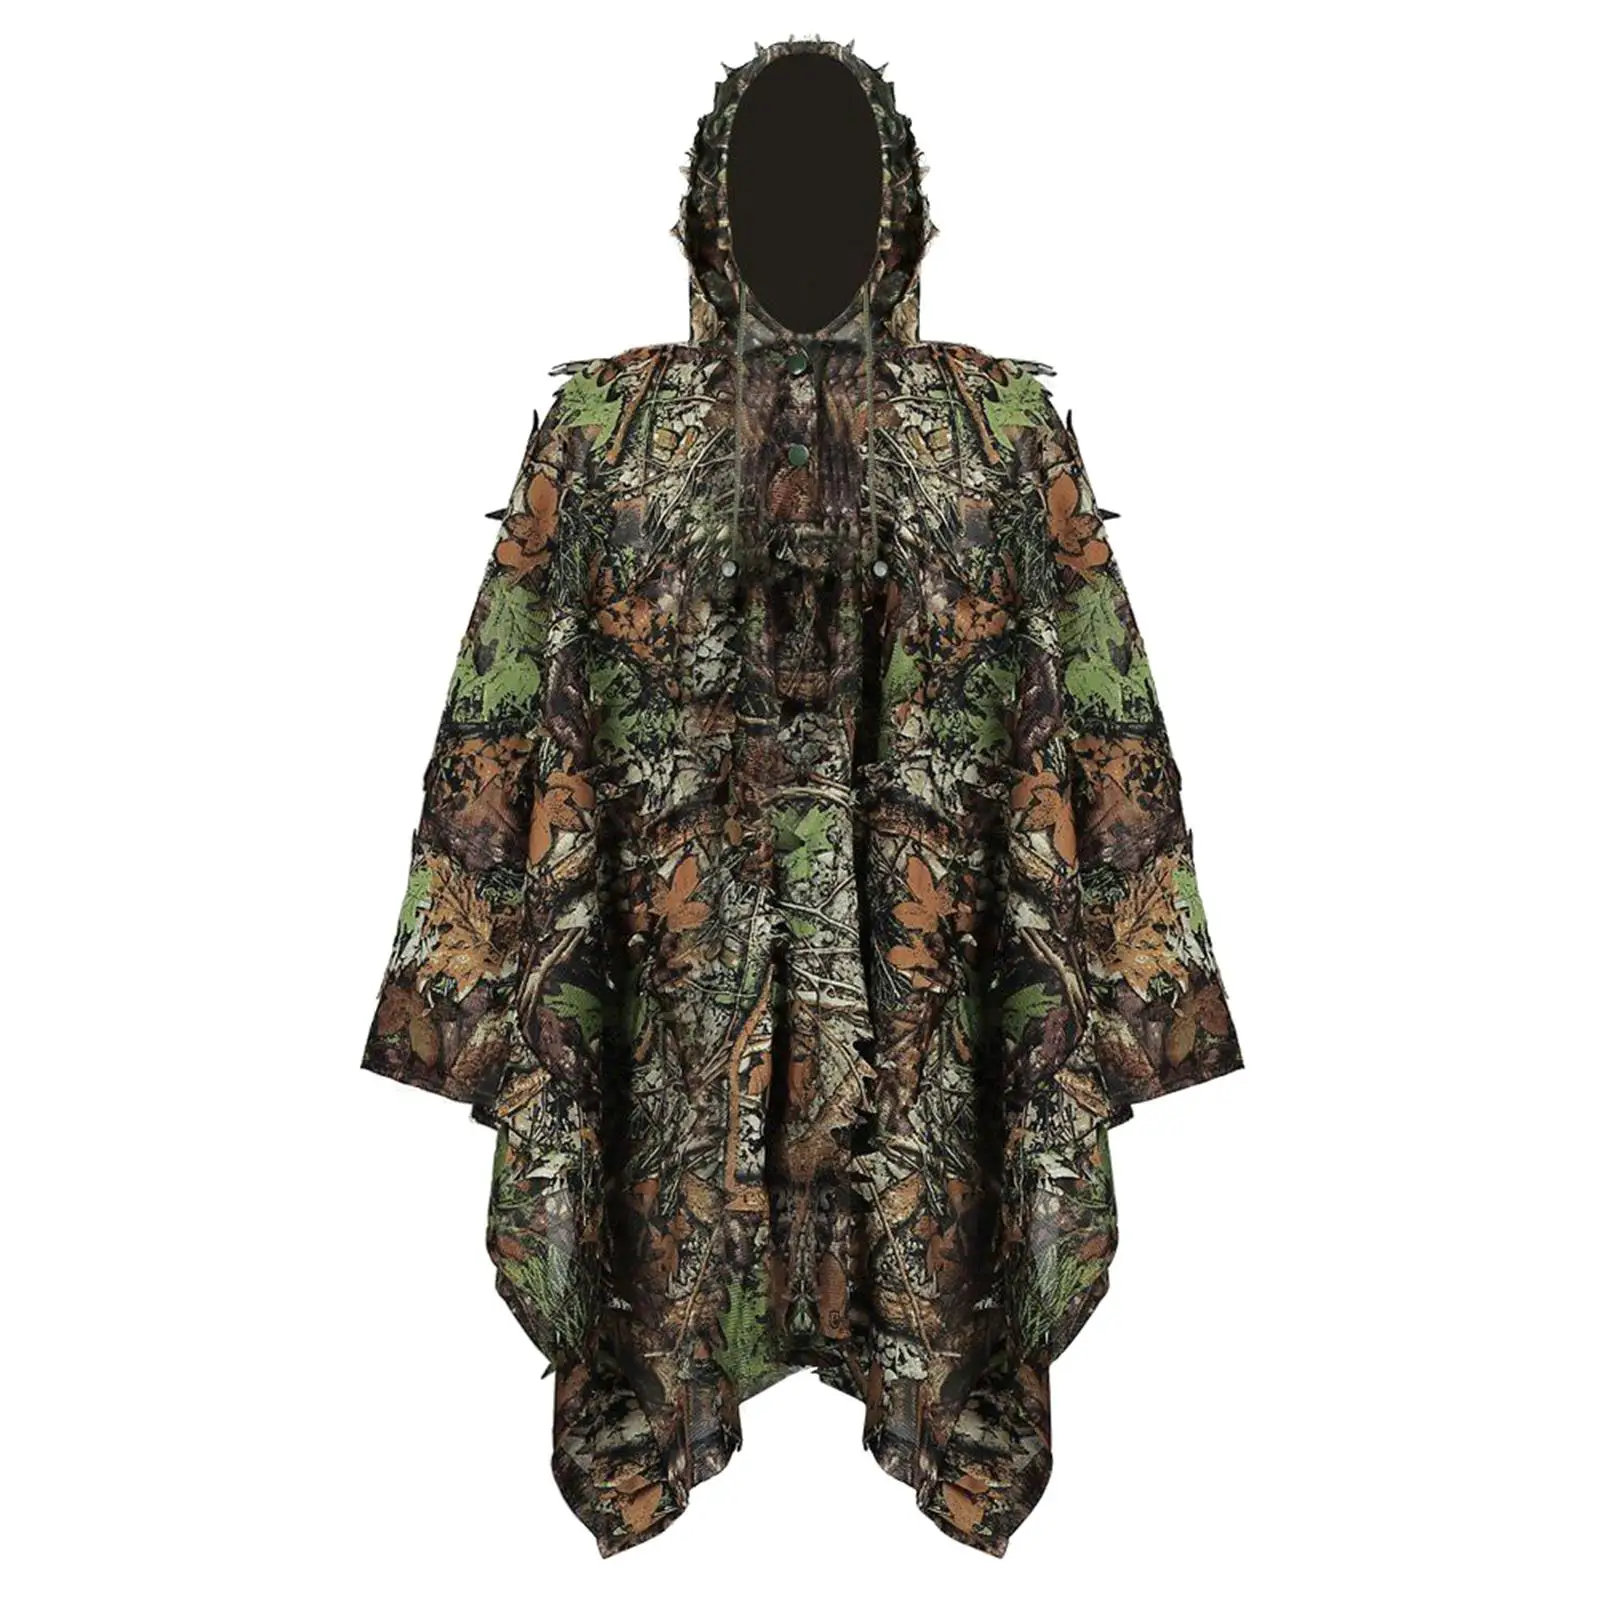 Ghillie Suit for Men Clothes Jacket Hood Woodland Cosplay suits Camo Suit for Game Birdwatching Halloween Costume Photography